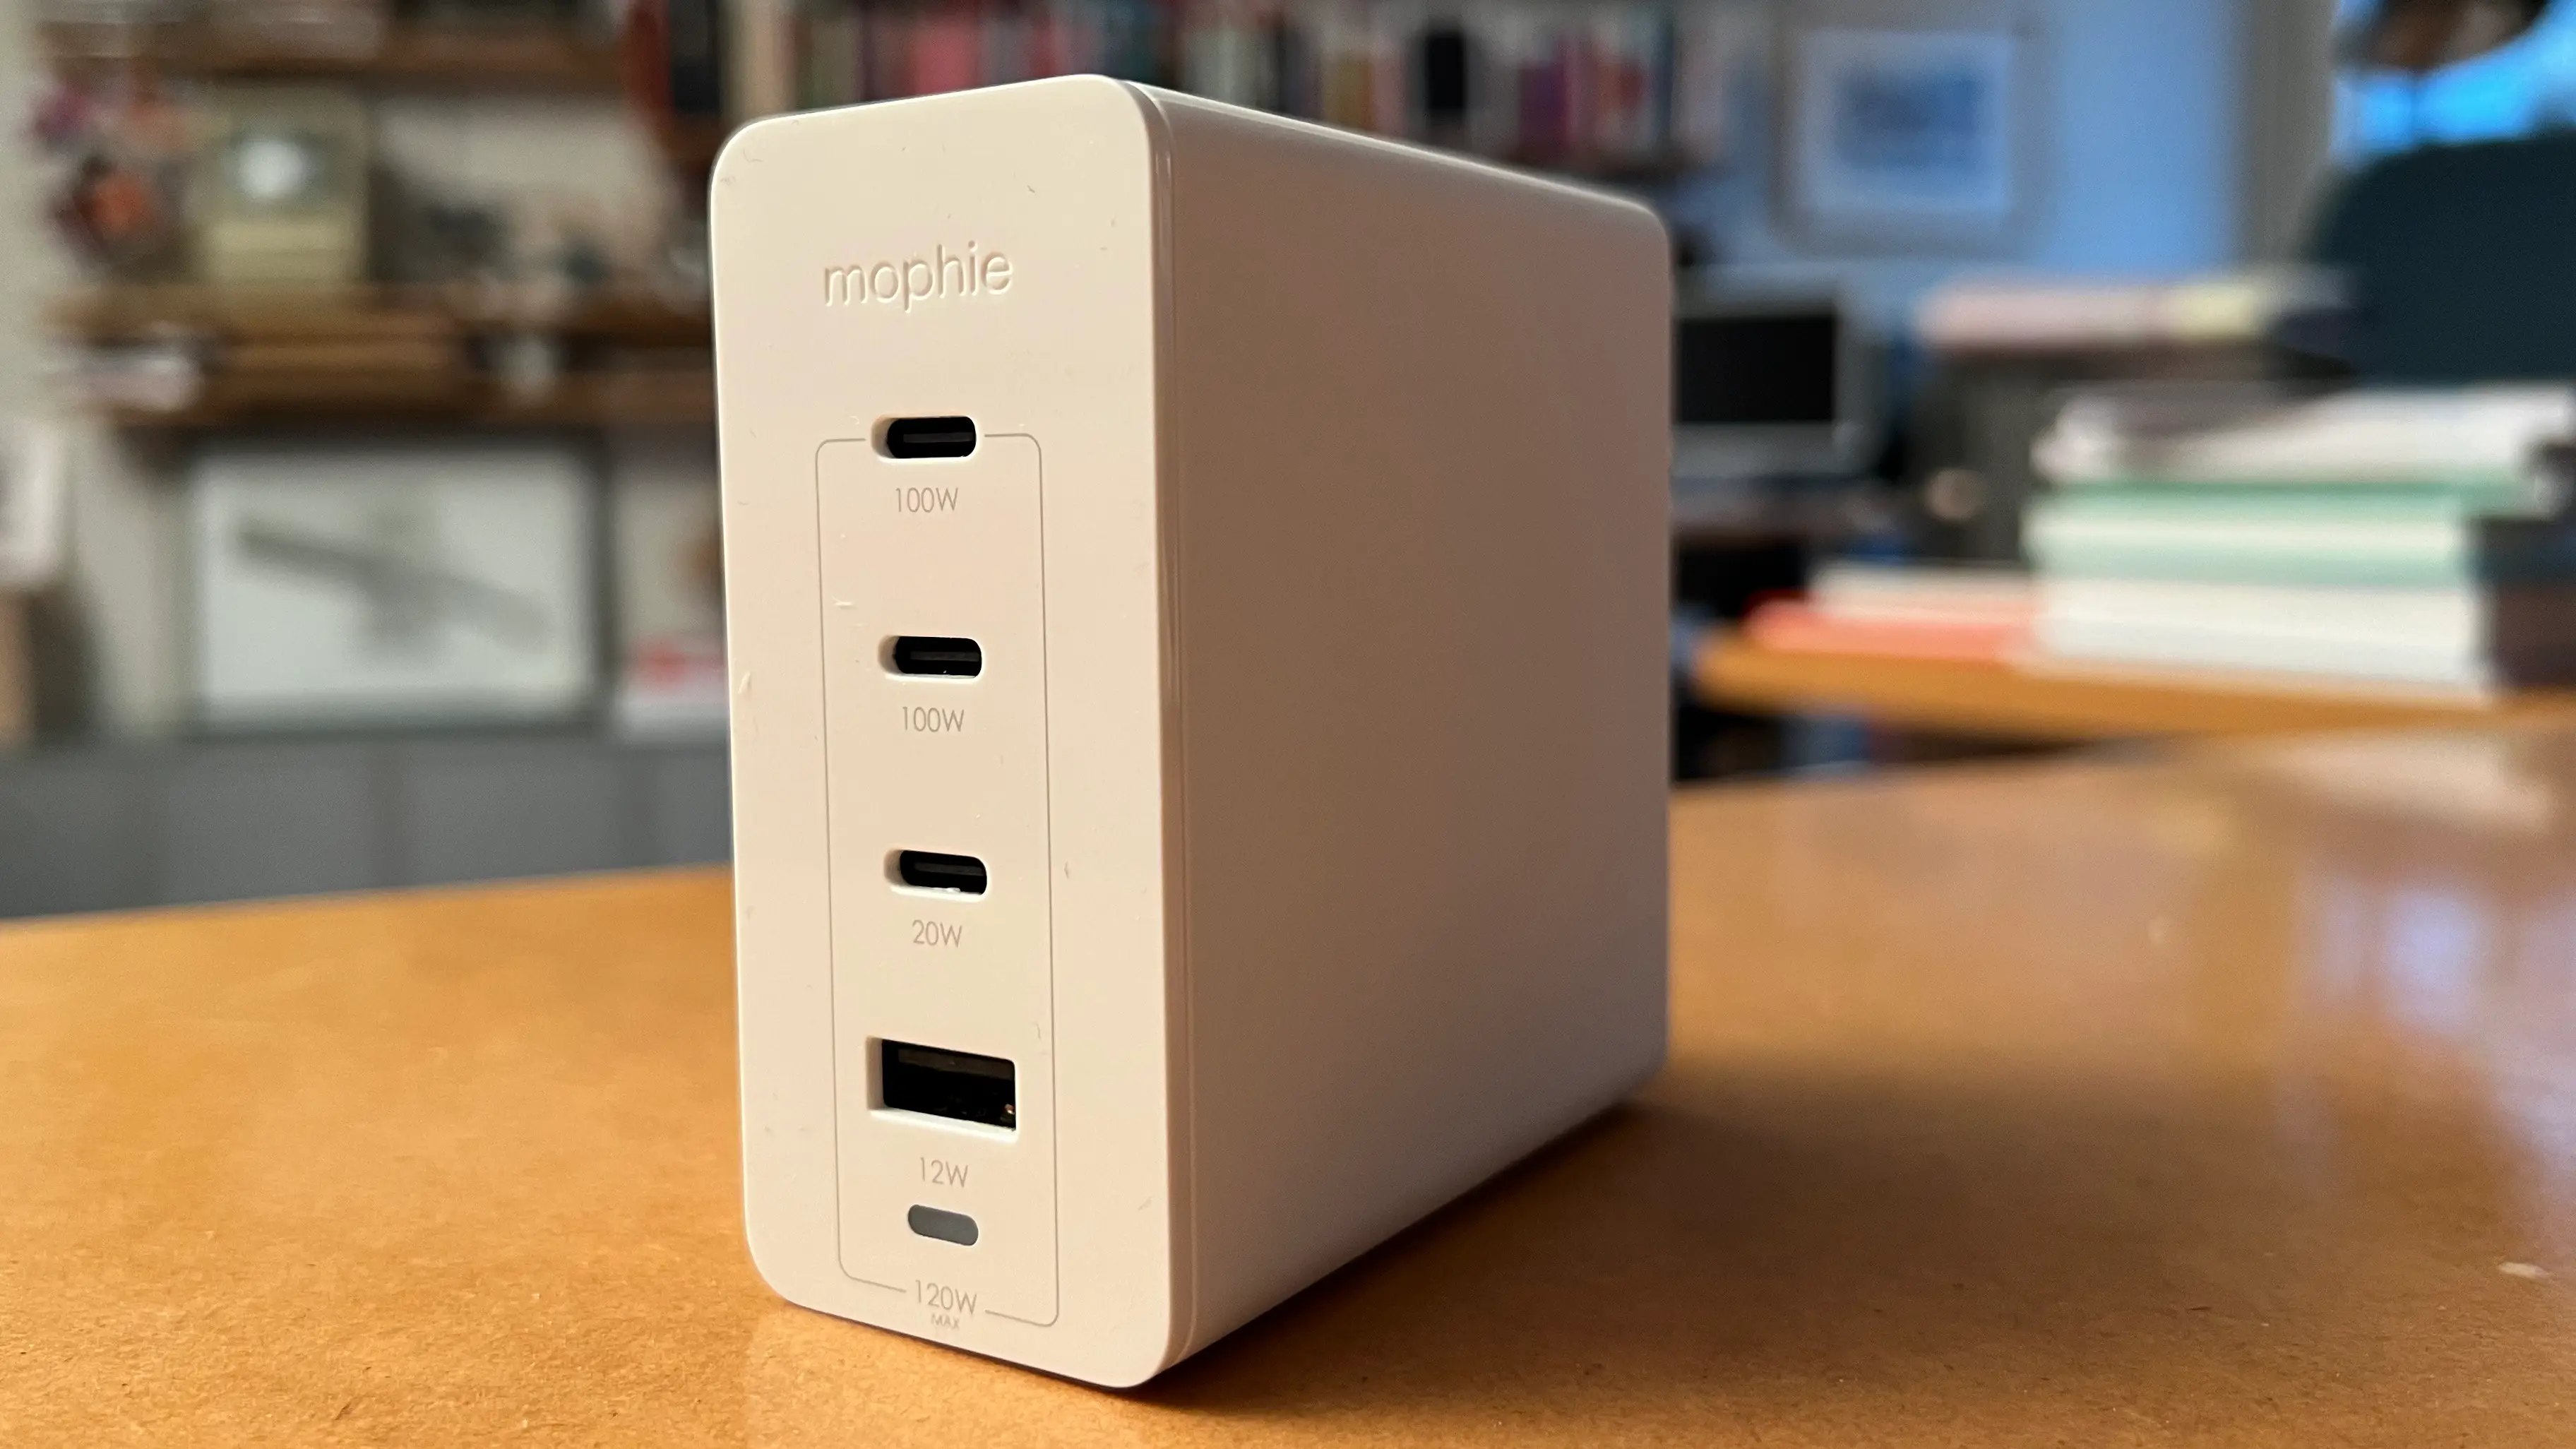 Close-up of the mophie speedport 120 4-port GaN wall charger